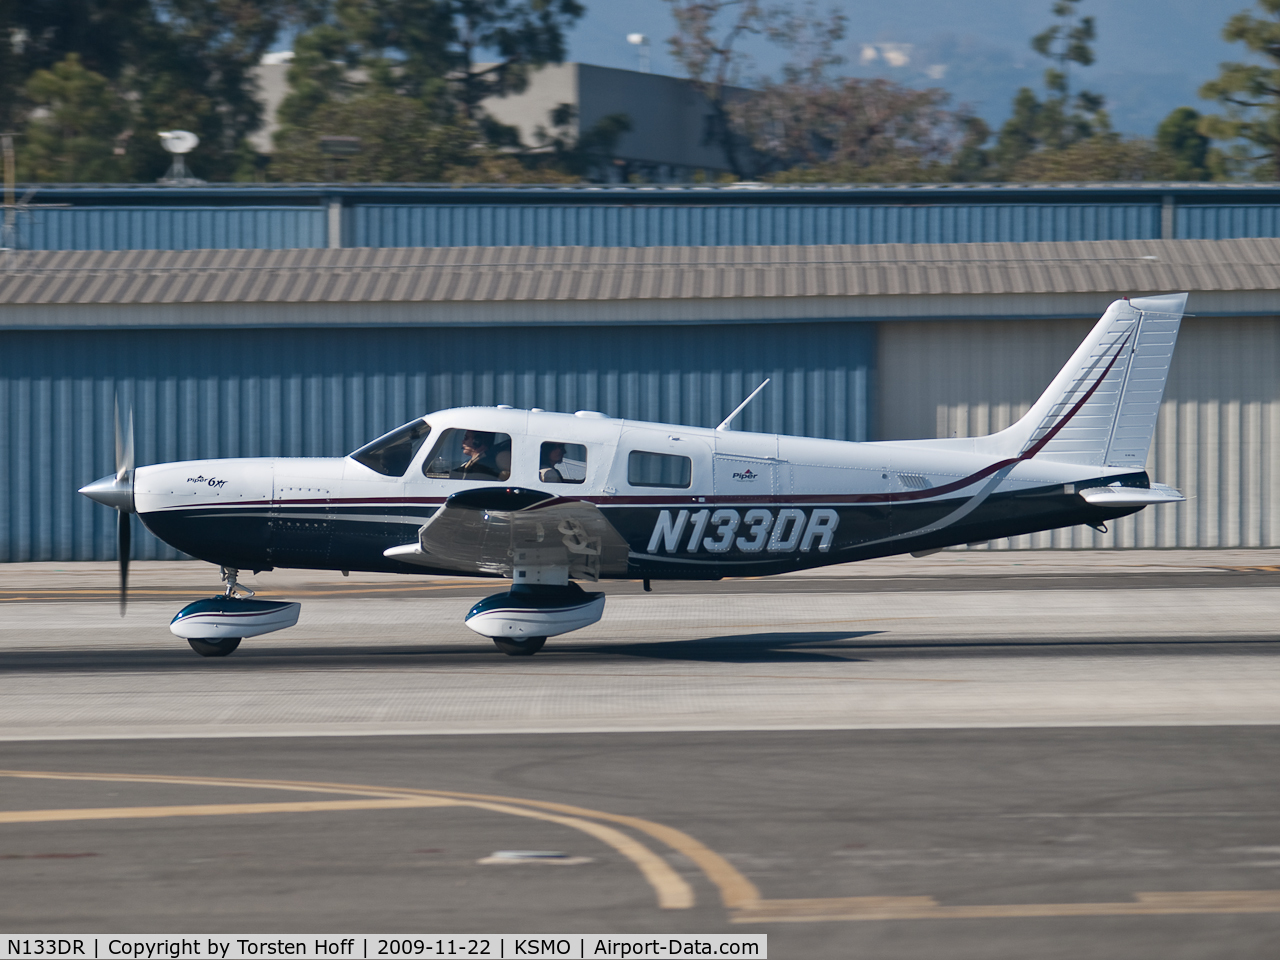 N133DR, 2005 Piper PA-32-301XTC Saratoga C/N 3255027, N133DR departing from RWY 21